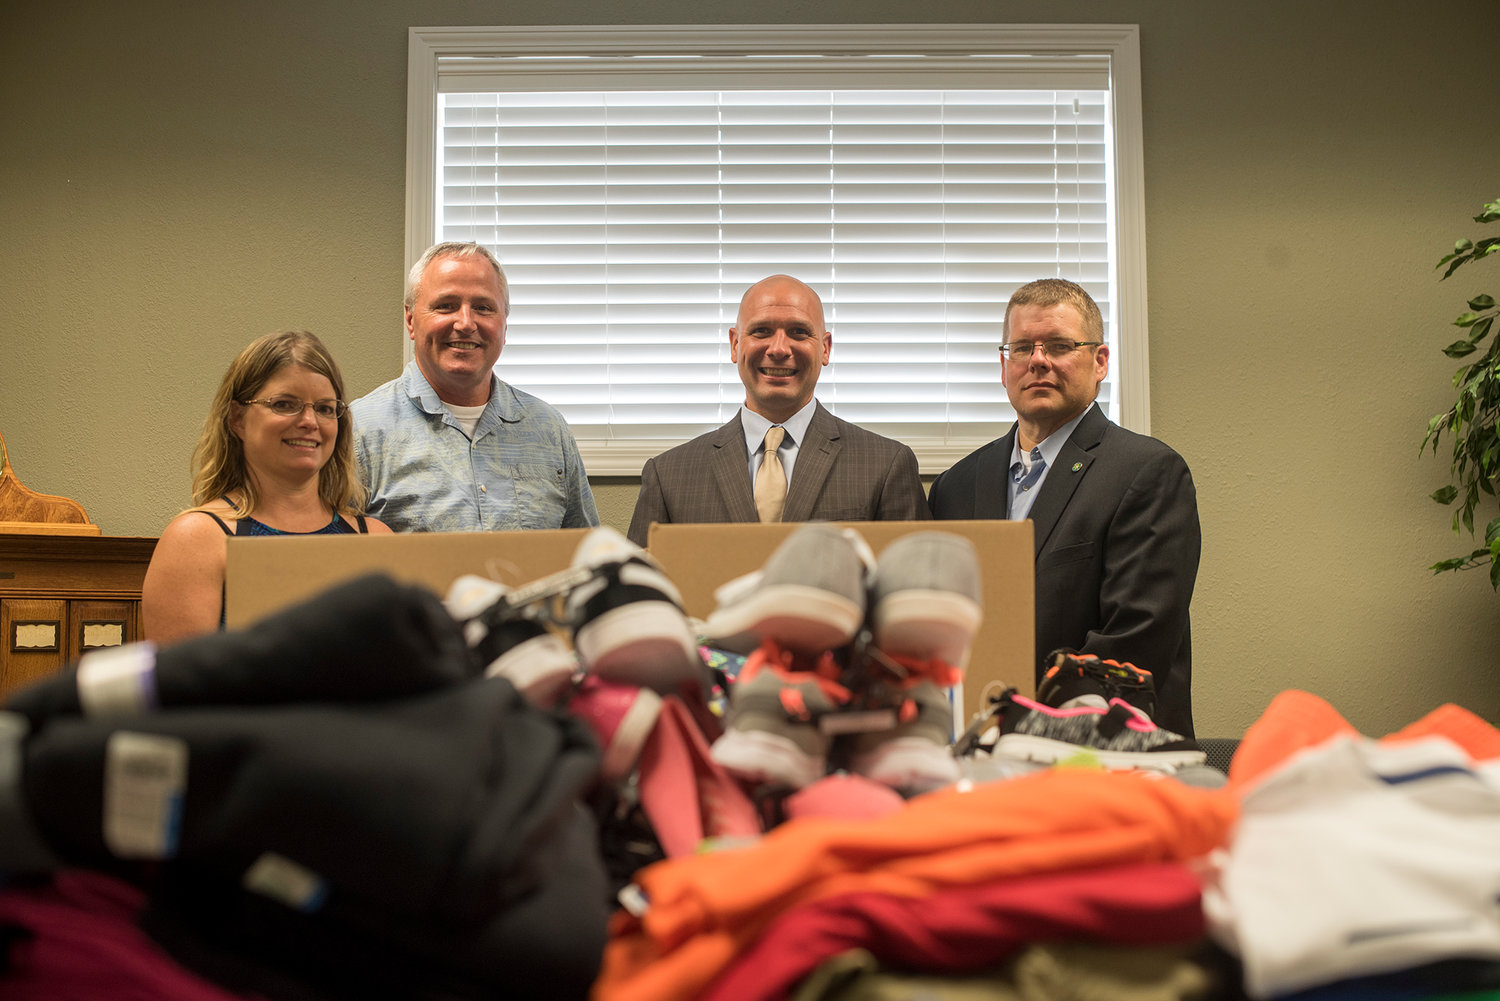 Standing behind $1,000 worth of clothes for school children on Wednesday are, from the left, co-owner of Dick’s Brewery Julie Pendleton, President of the Centralia Community Foundation Dan Rich, Centralia City Councilor Peter Abbarno and Centralia Foundation Secretary Jonathan Meyer. Centralia law firm Althauser Rayan Abbarno partnered with the foundation and Dick’s Brewery to raise funds to purchase the clothes. 